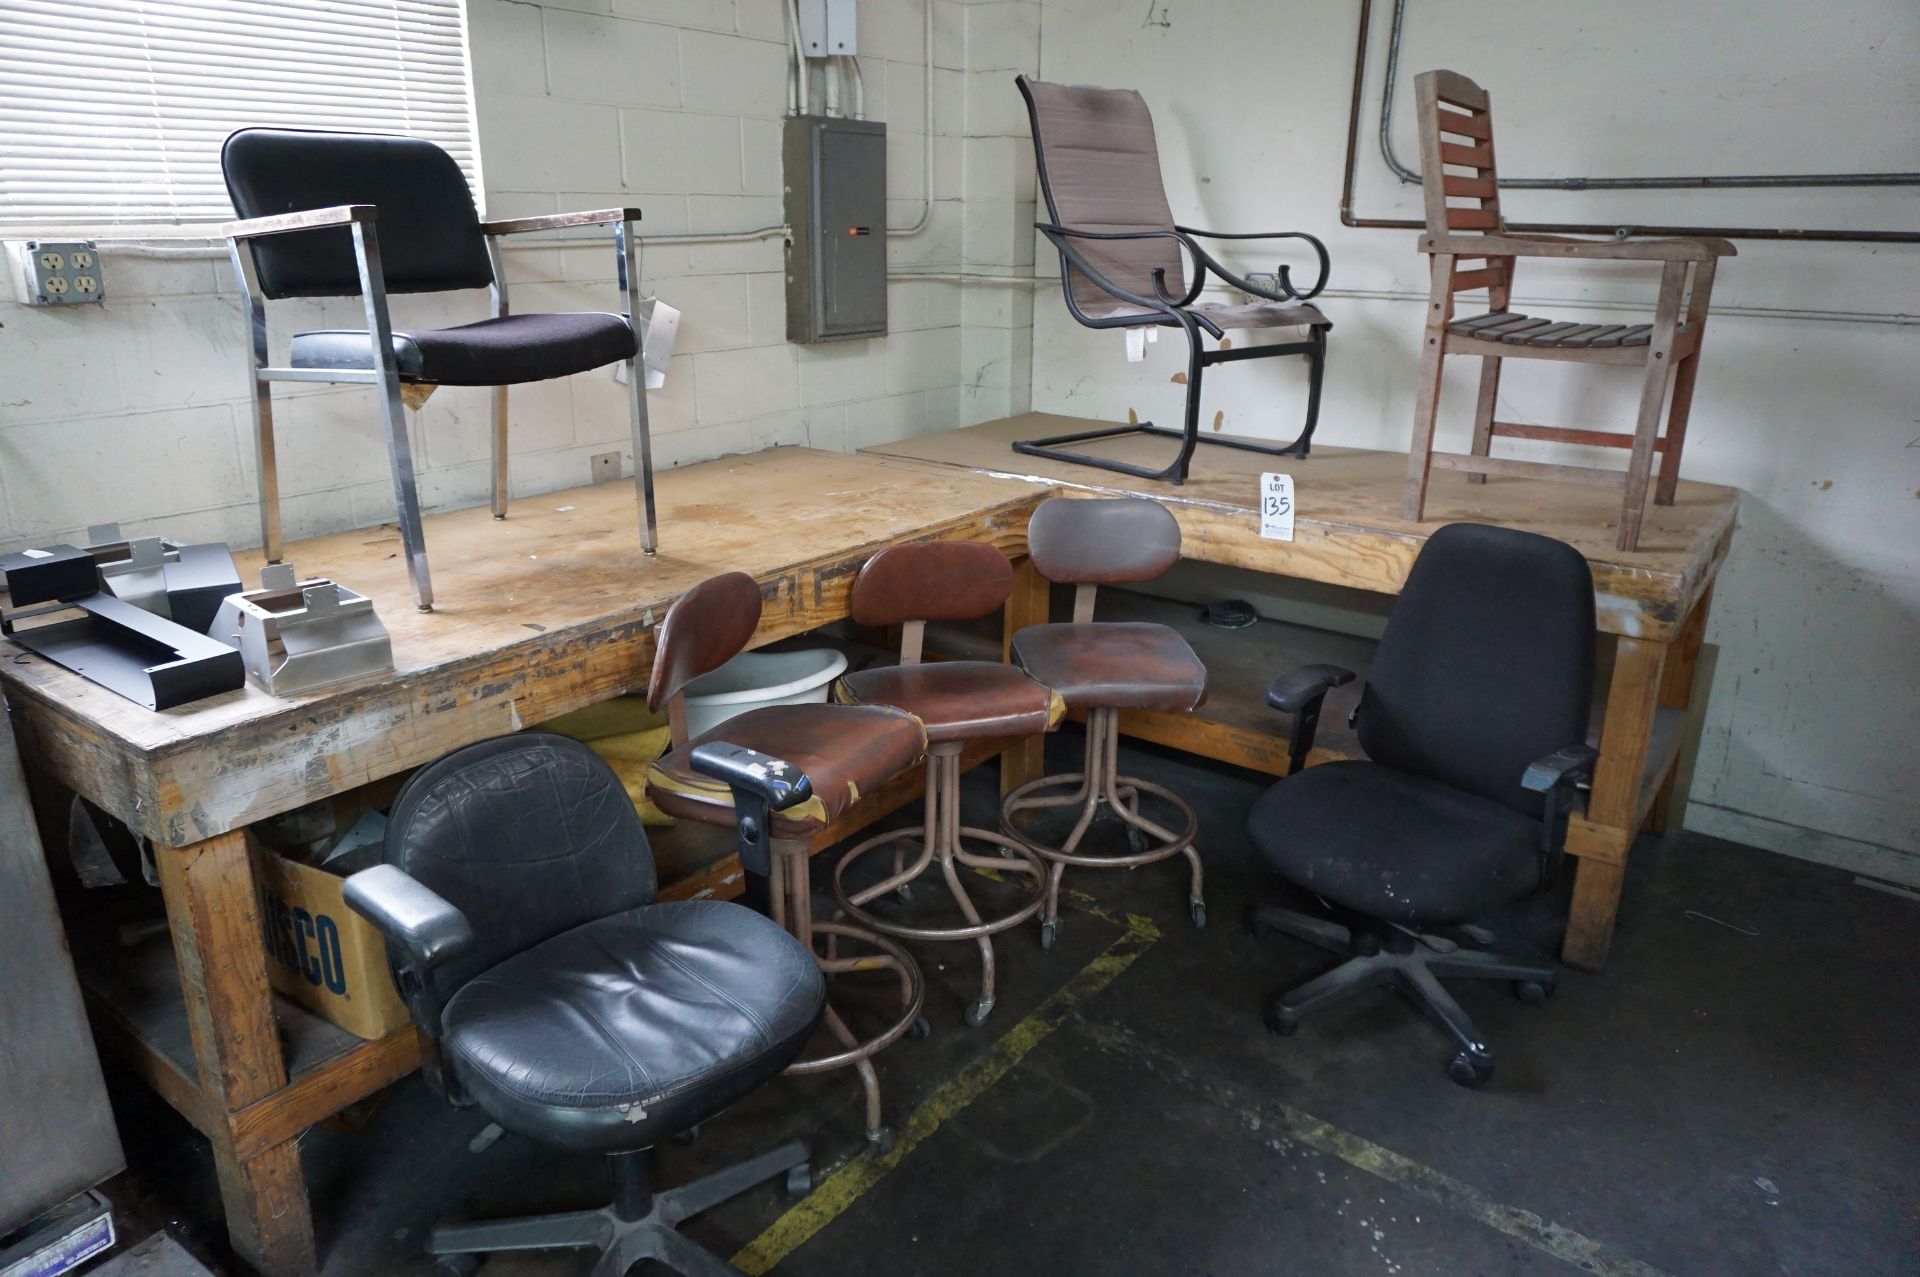 POWDER COATING ROOM SUPPORT LOT TO INCLUDE: (2) WOOD TABLES, (8) MISC. CHAIRS, 2 DOOR STEEL